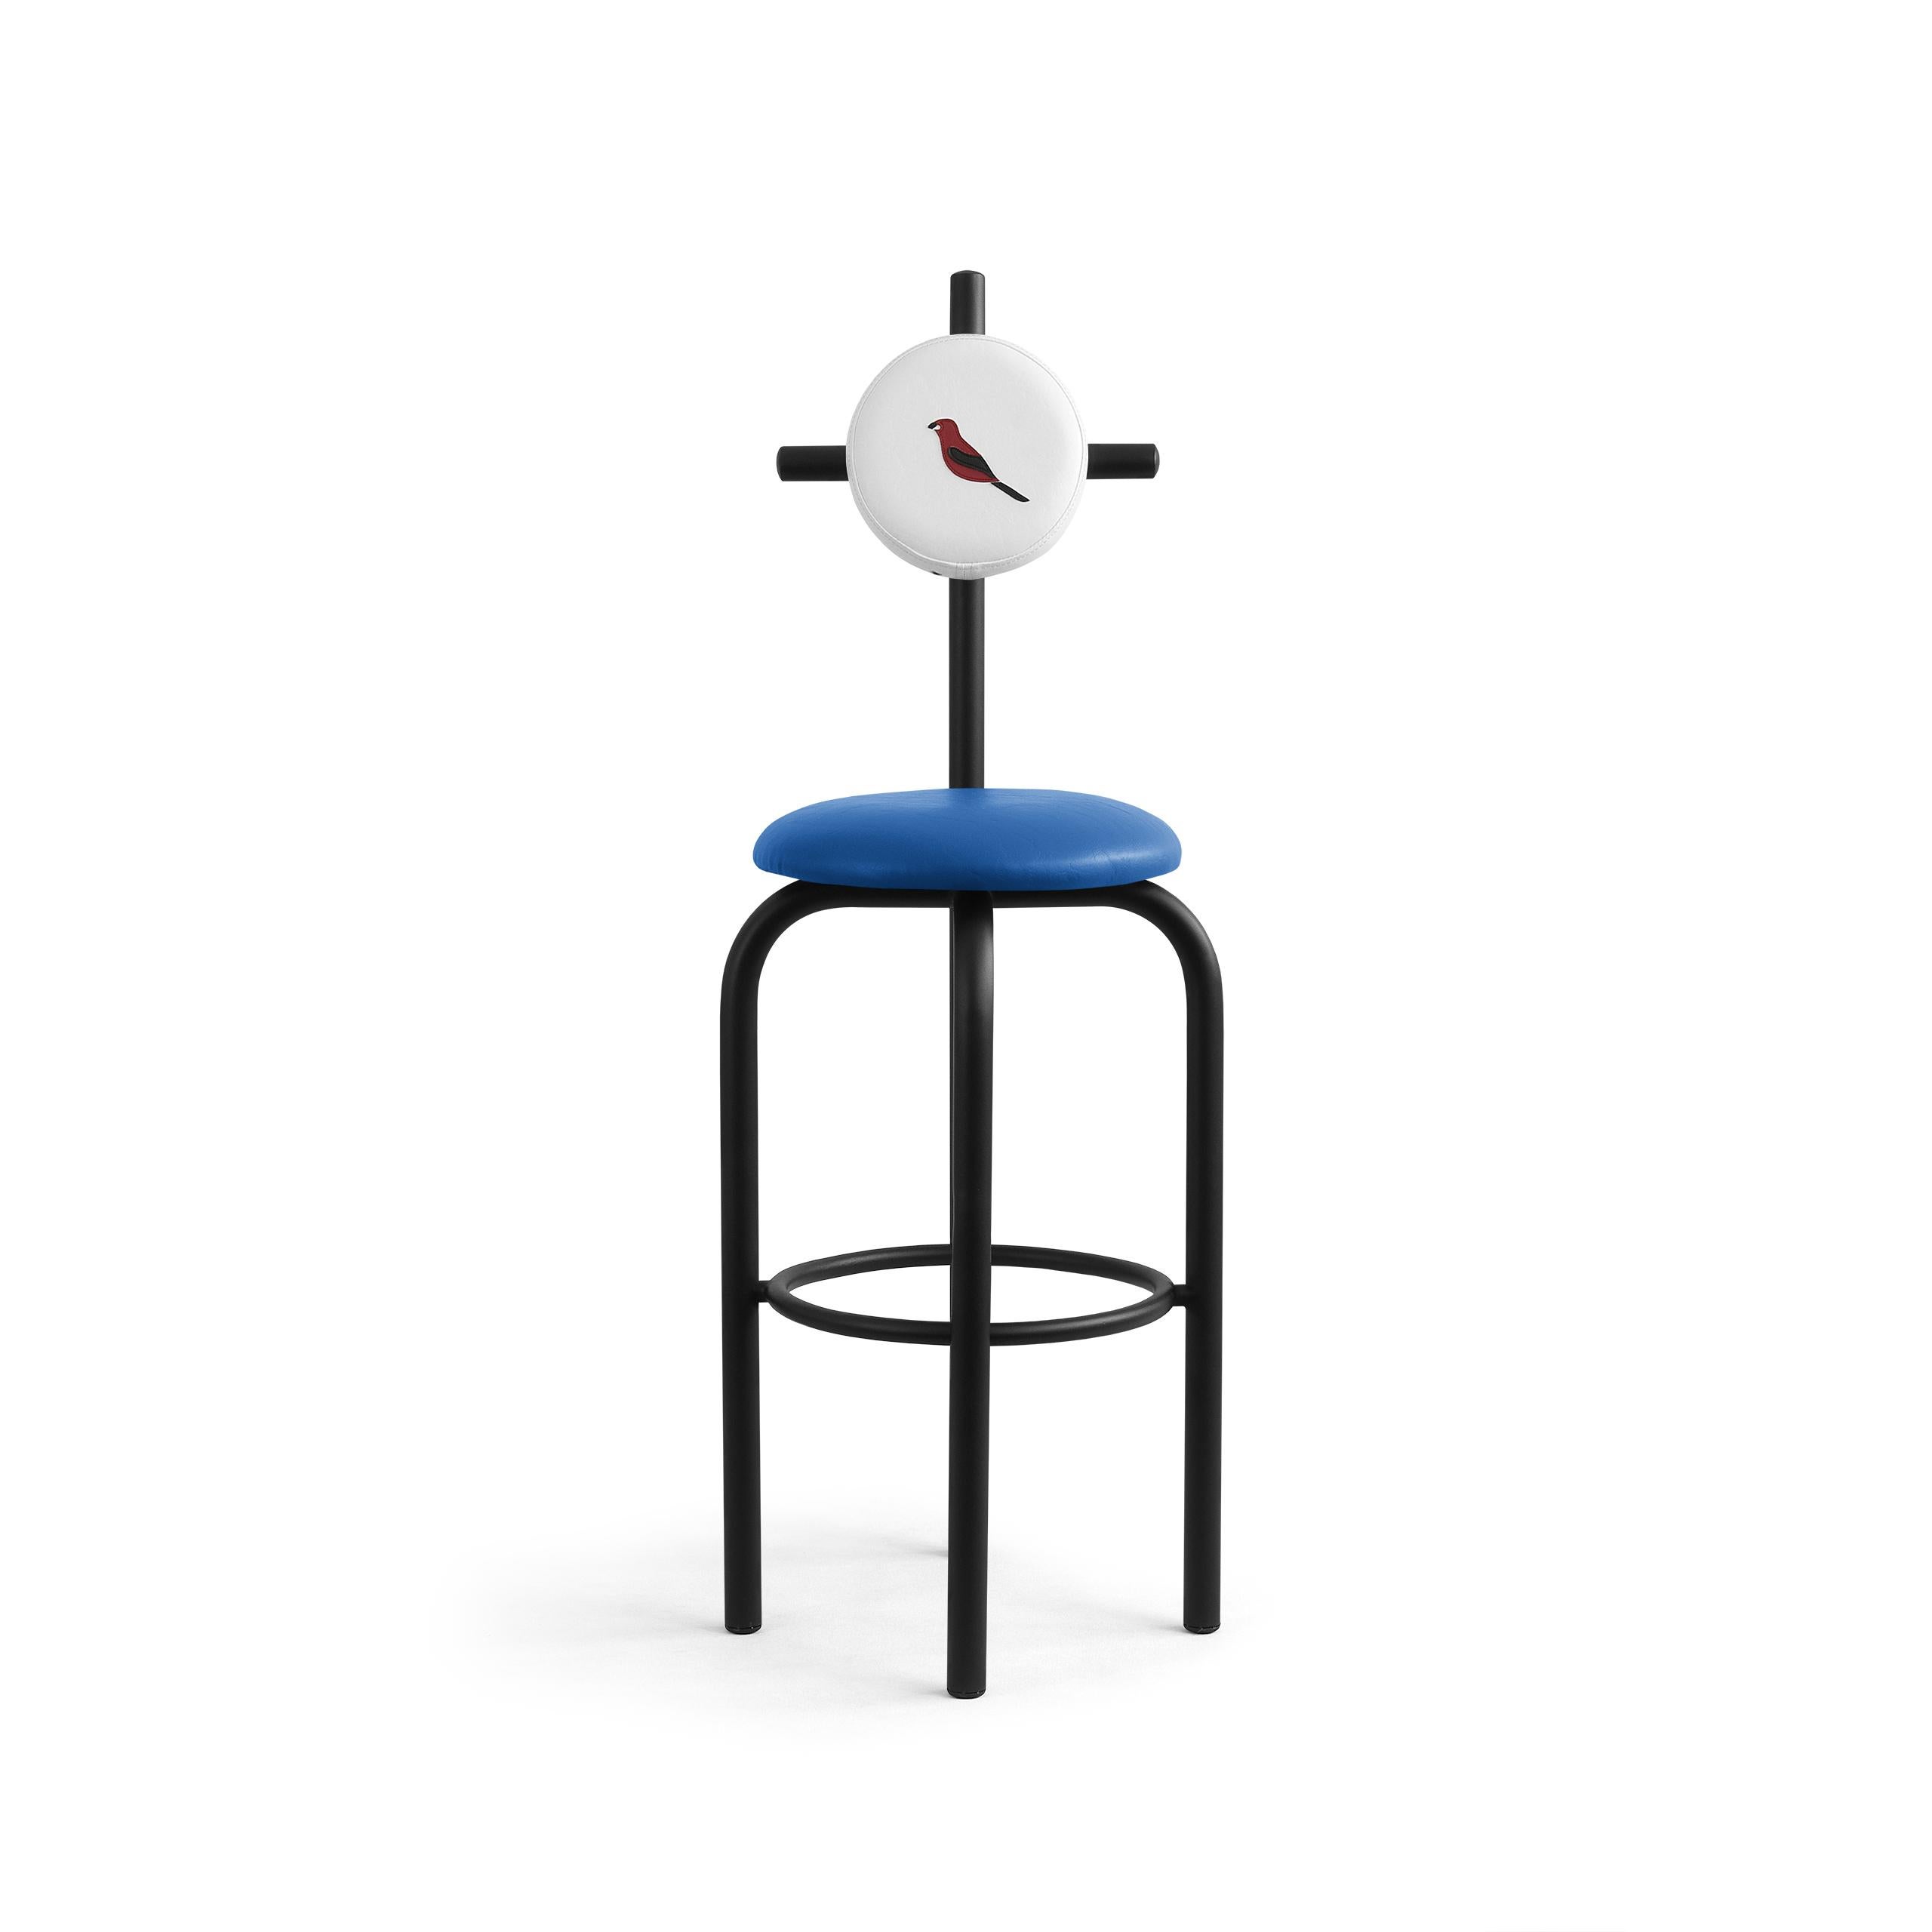 PK19 bar stool is handcrafted in tubular carbon steel and is finished in black micro-textured electrostatic painting.
Seat and backrest are upholstered in nautical anti-mold leatherette over naval plywood.
The seat has no seams and its rounded shape